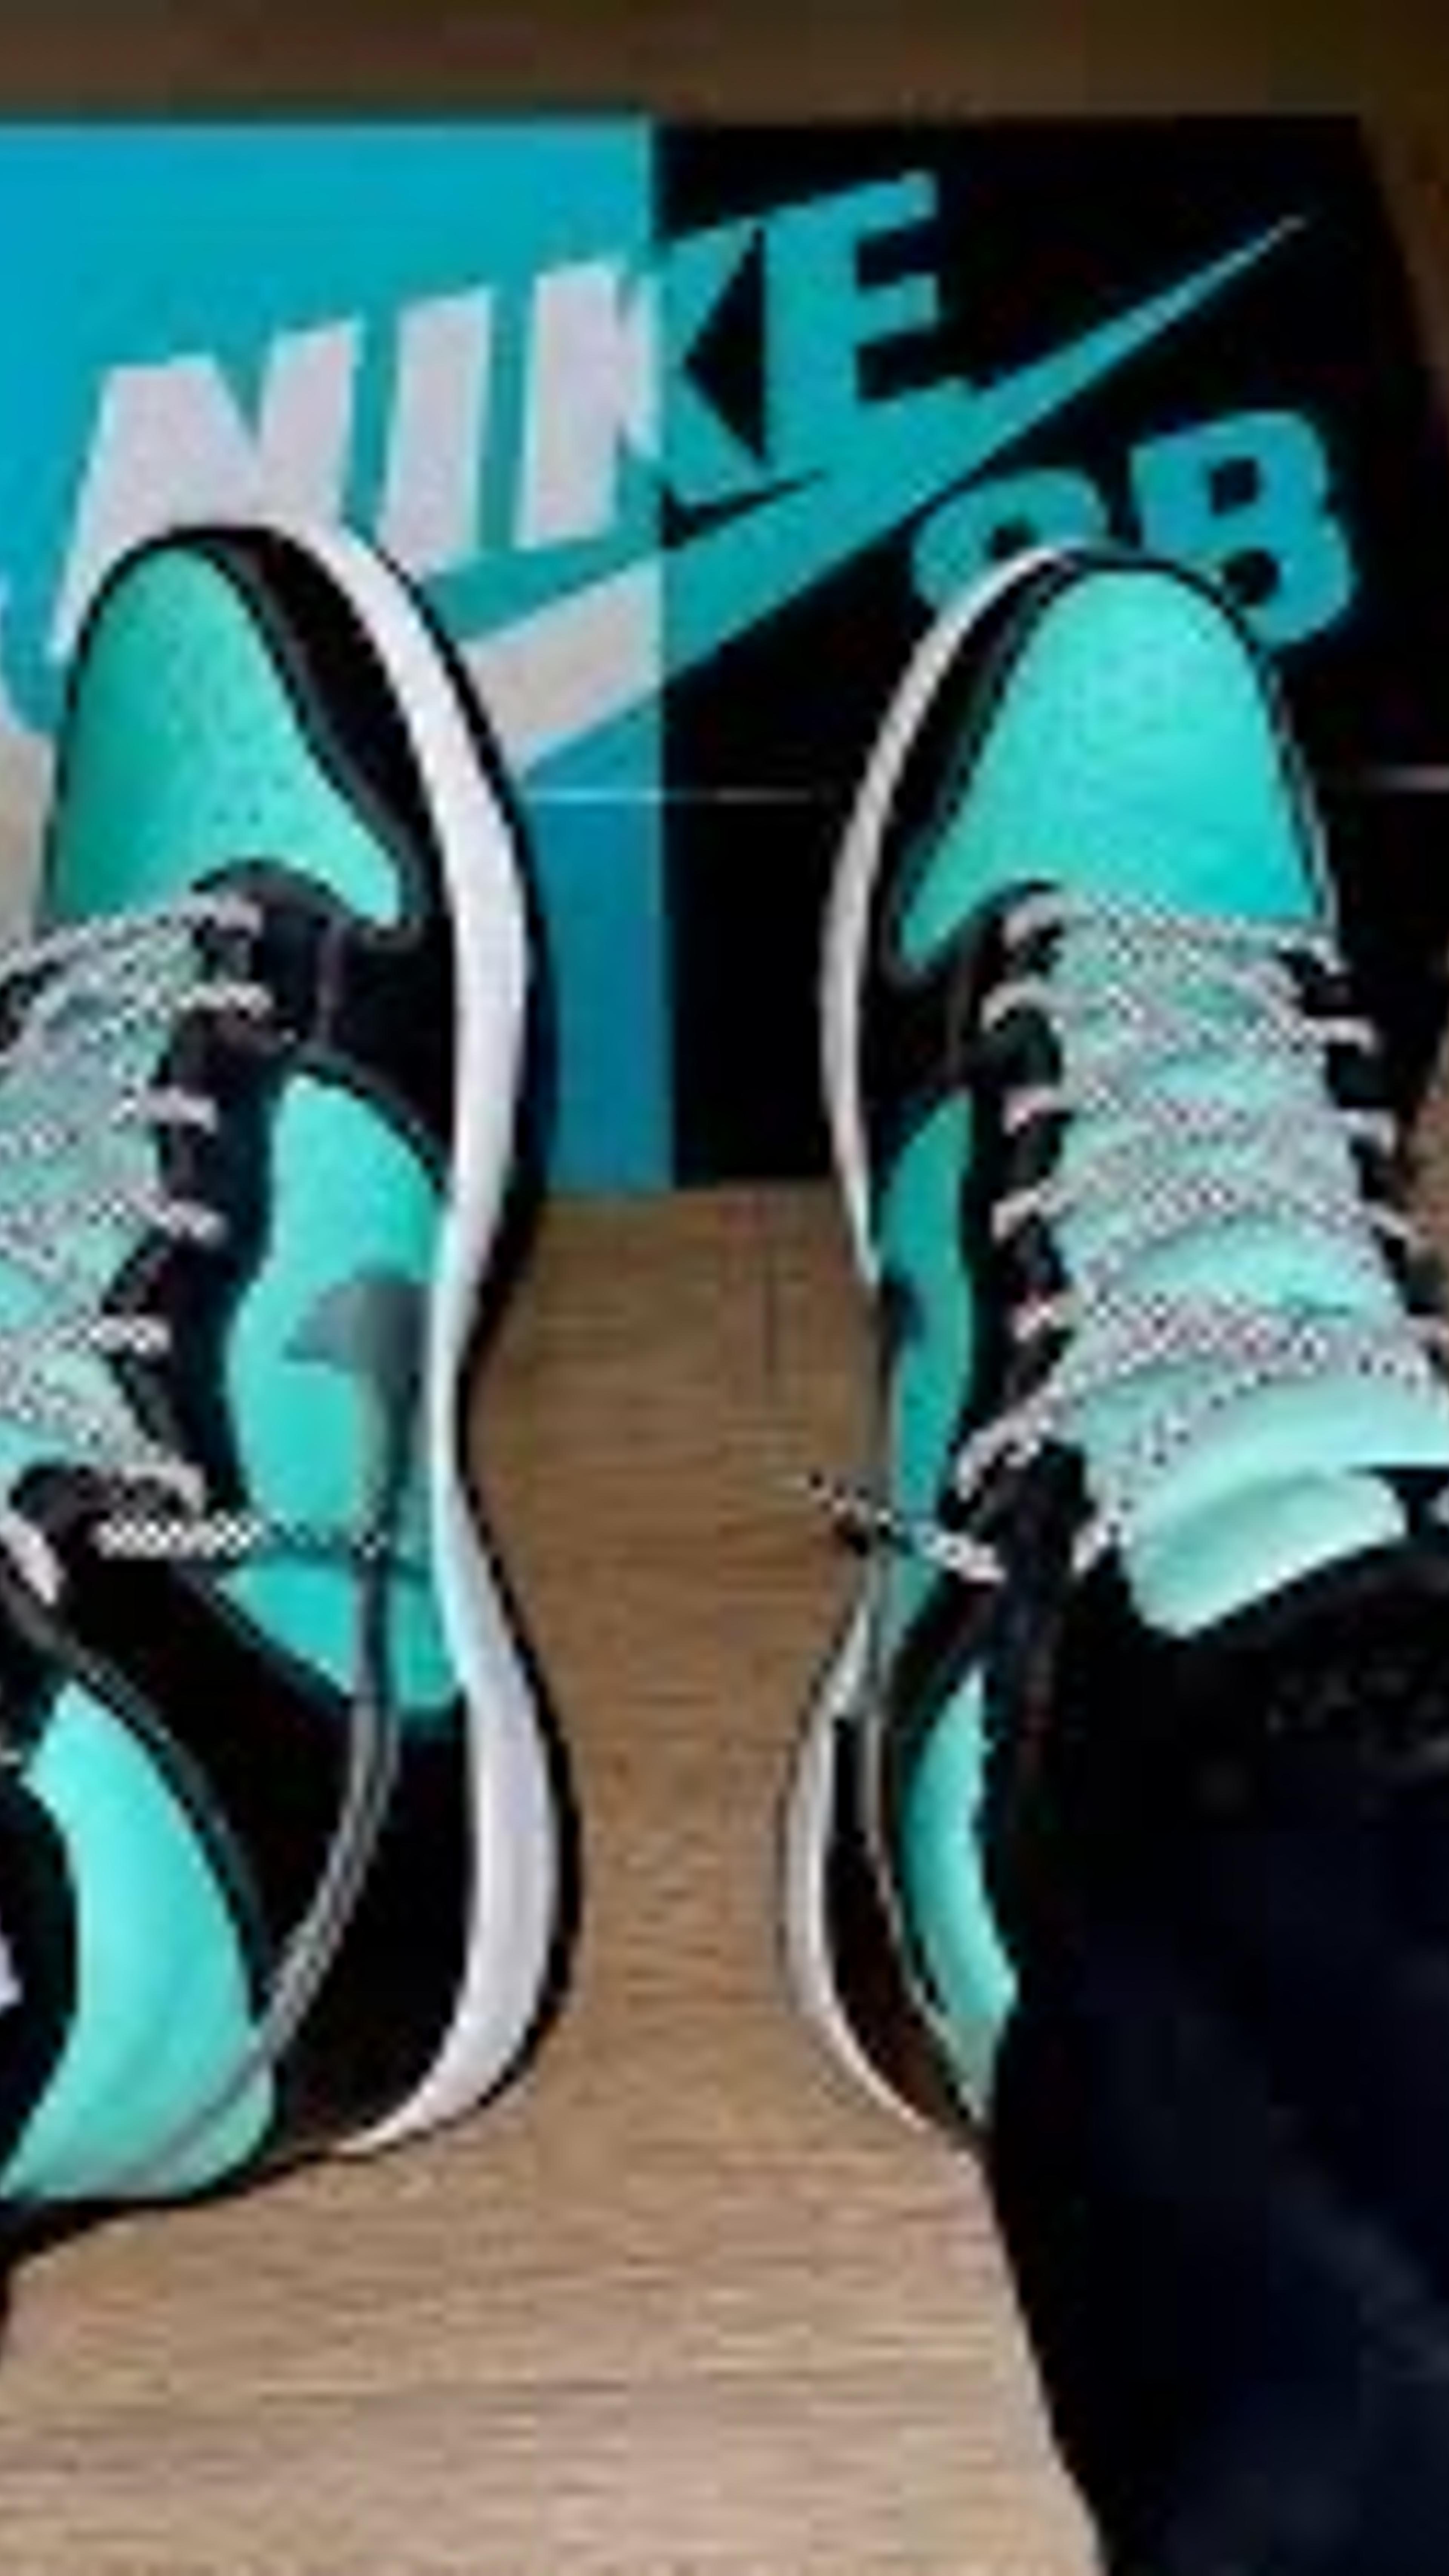 Preview image for the show titled "Mys Wheel DS SBDUNK HIGH TIFFANY DIAMOND Choice sz 9/10/11/12/13" at April 27, 2024